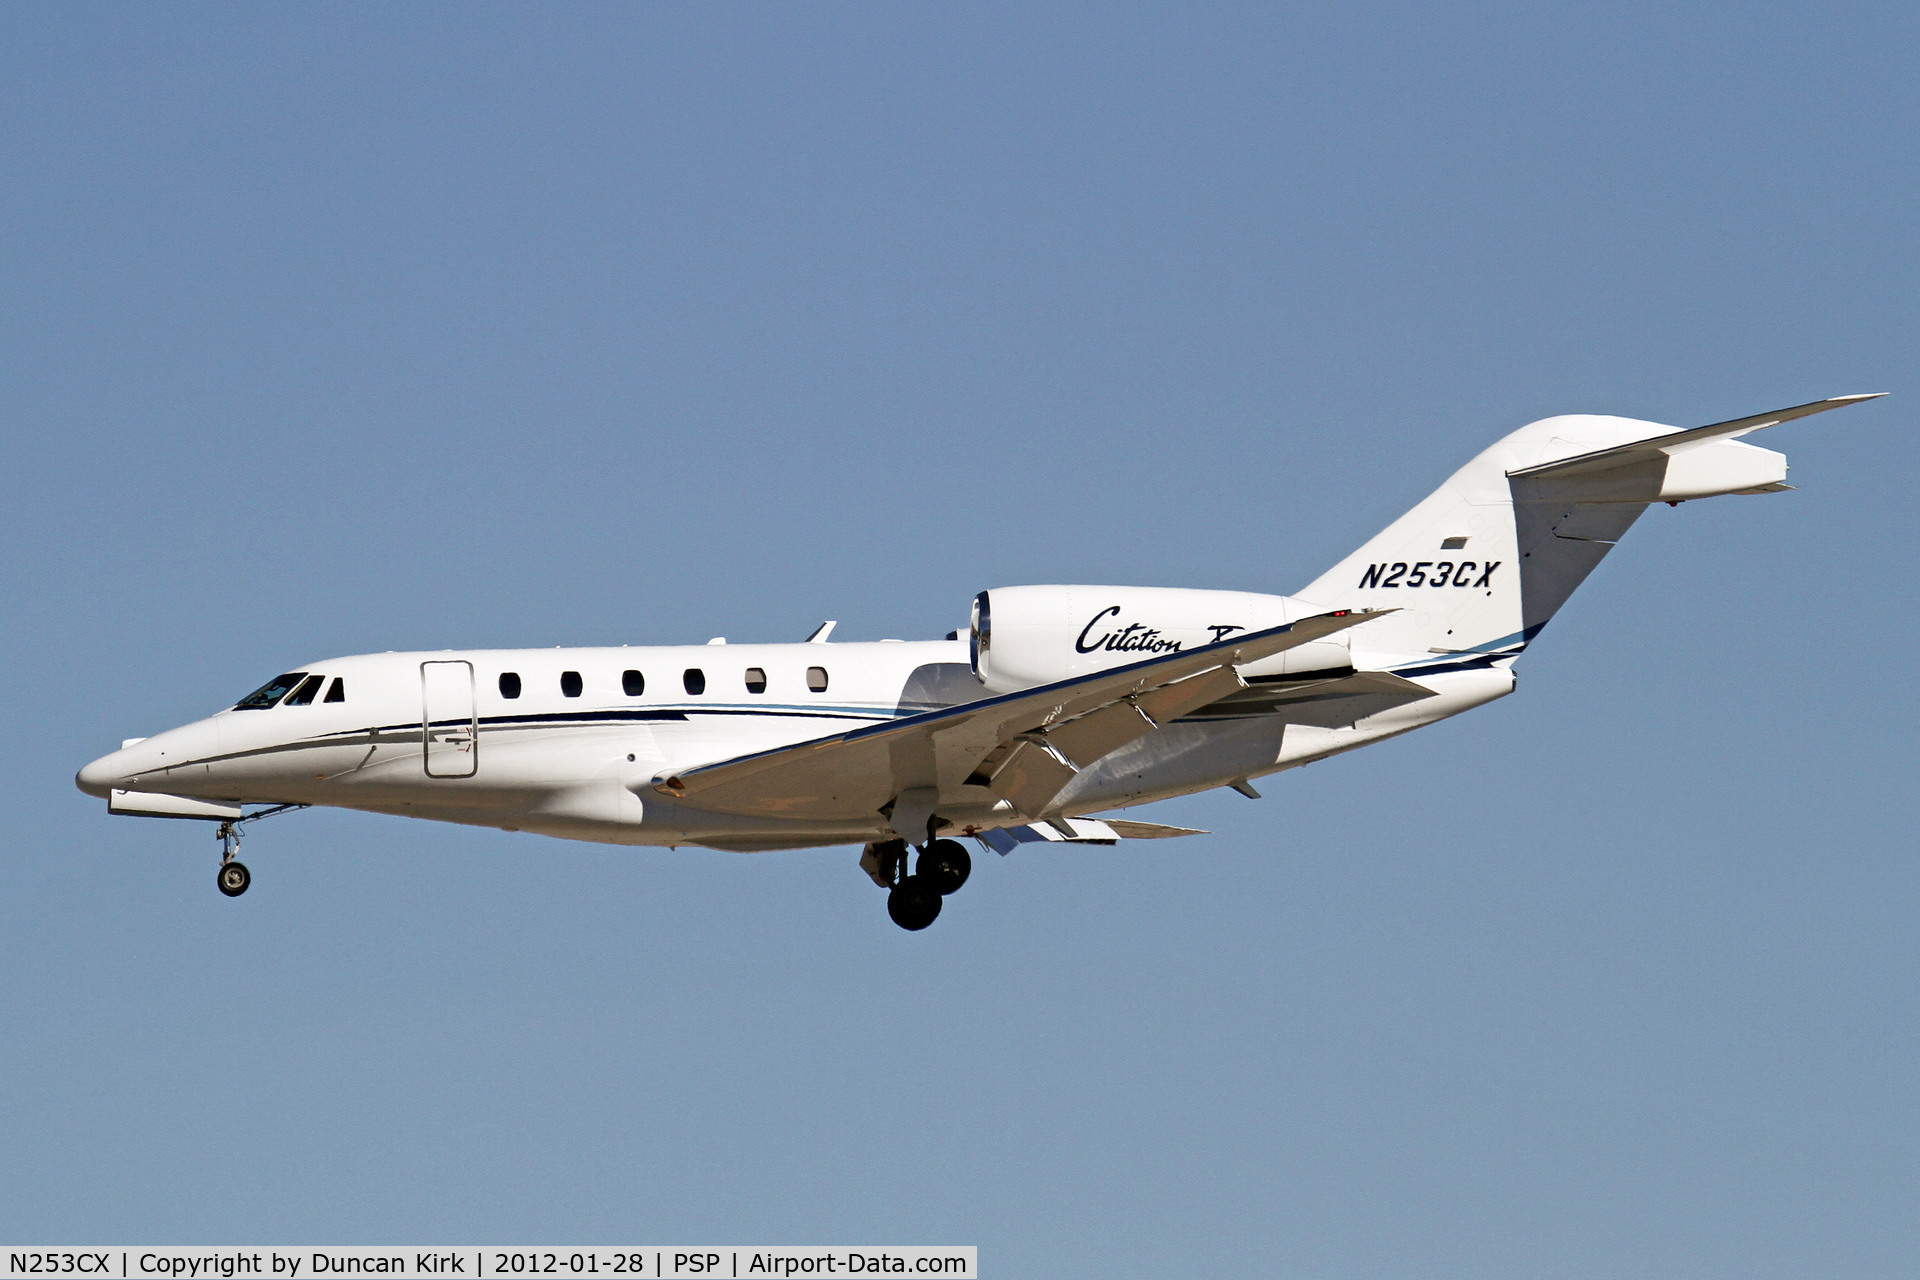 N253CX, 2006 Cessna 750 Citation X Citation X C/N 750-0253, Landing on an 80+ degree day in January at Palm Springs